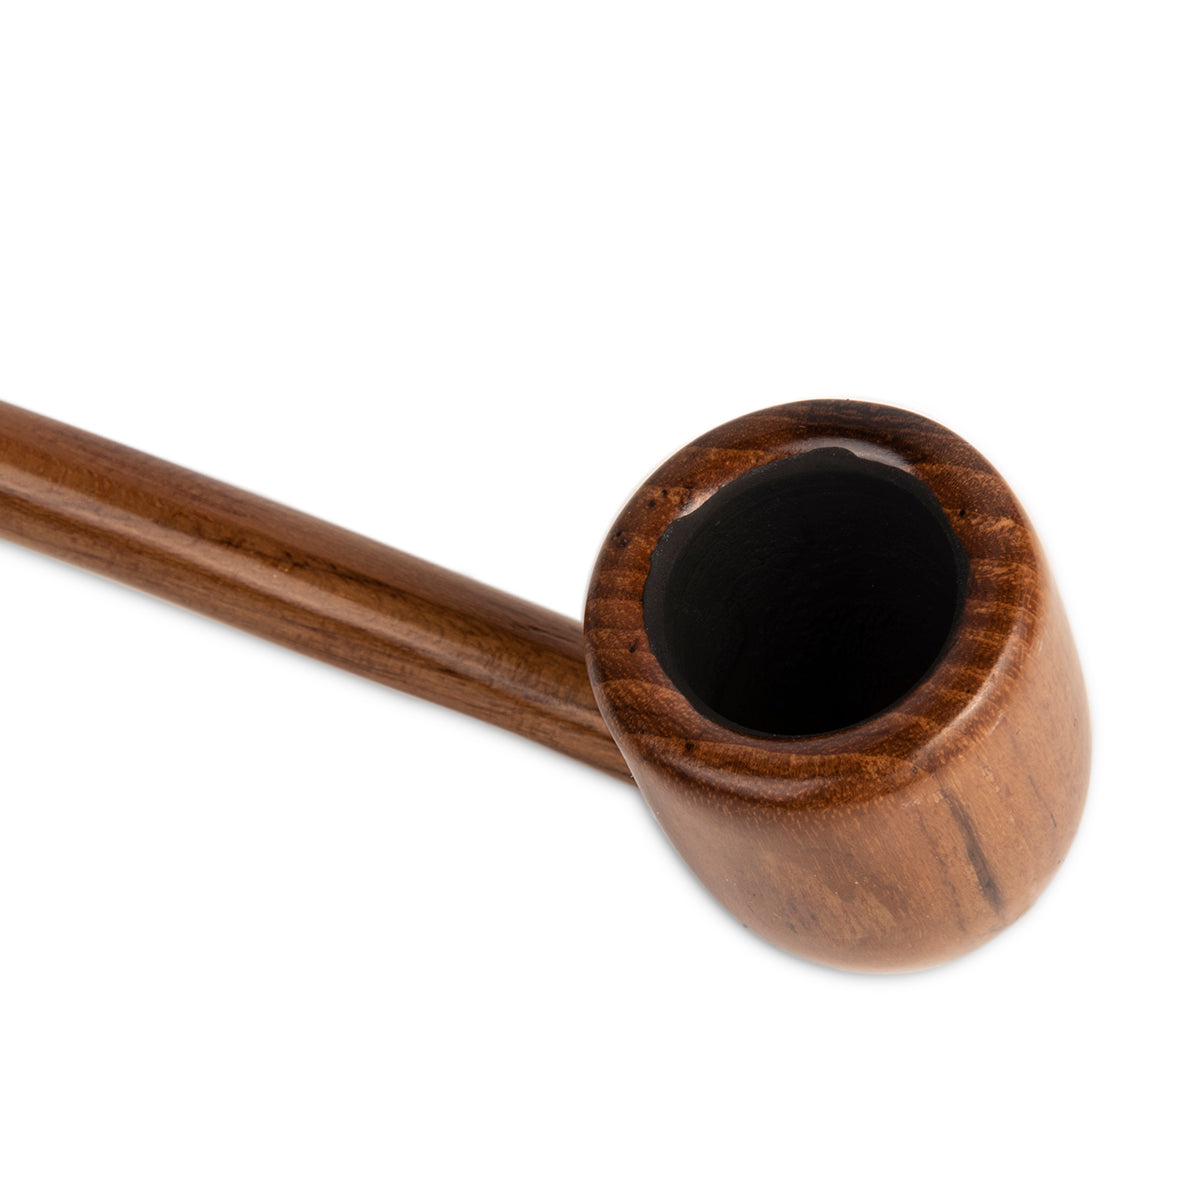 The Lord of the Rings Gandalf's Pipe